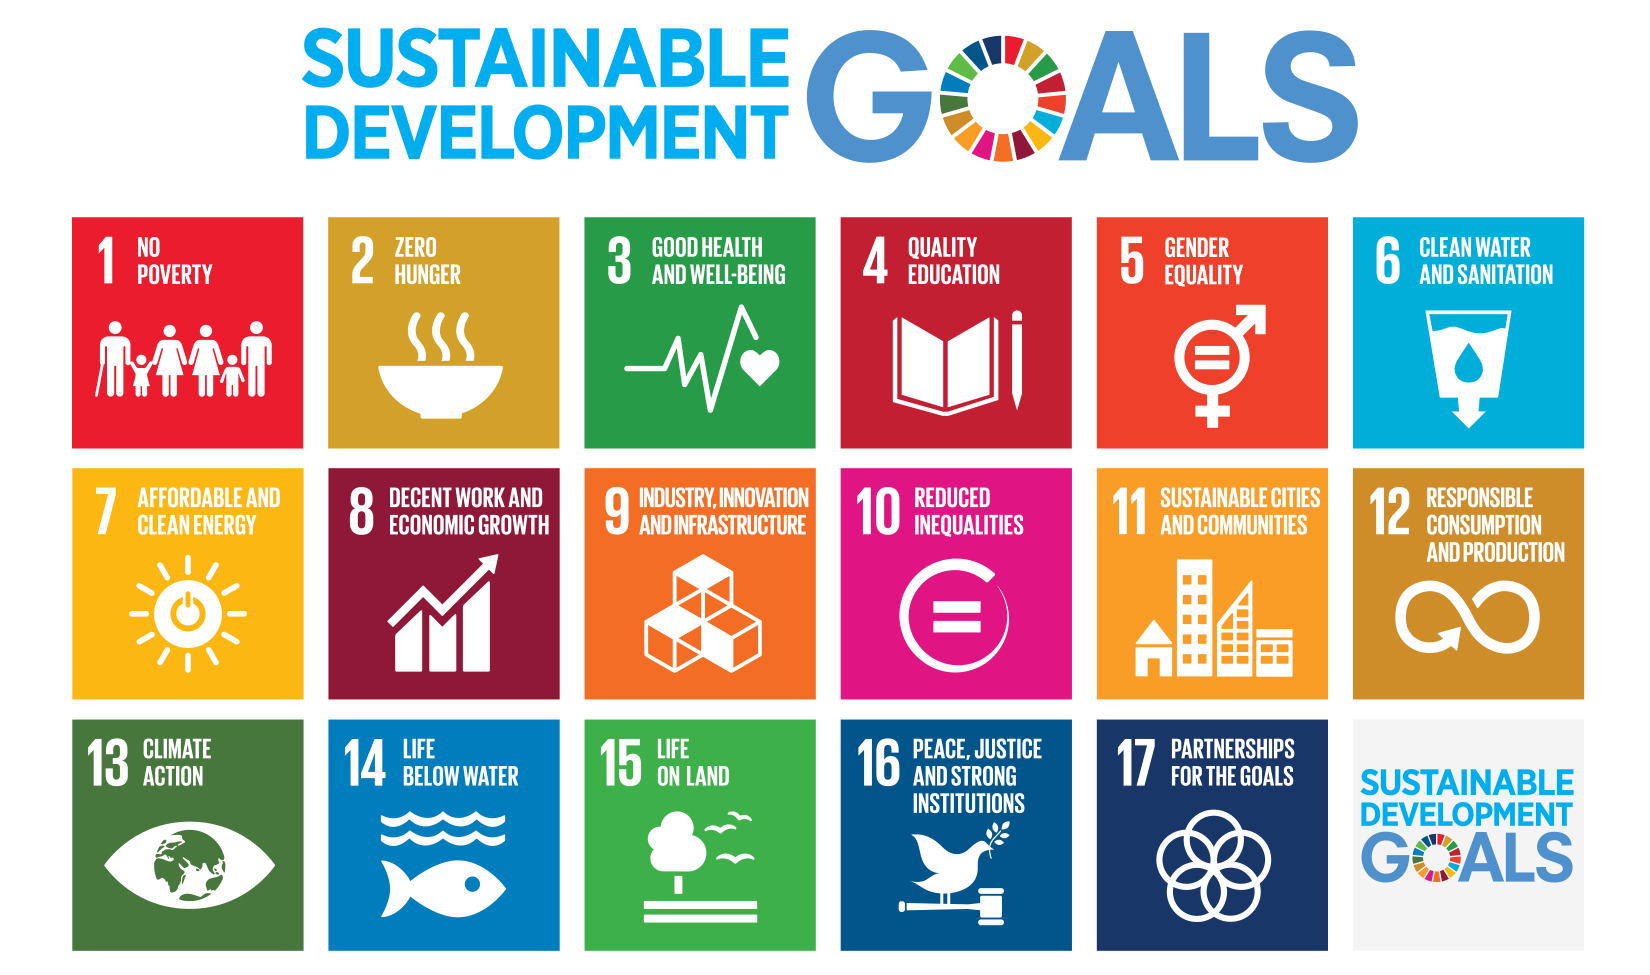 Detail view of the Sustainable development goals (Copyright: United Nations)